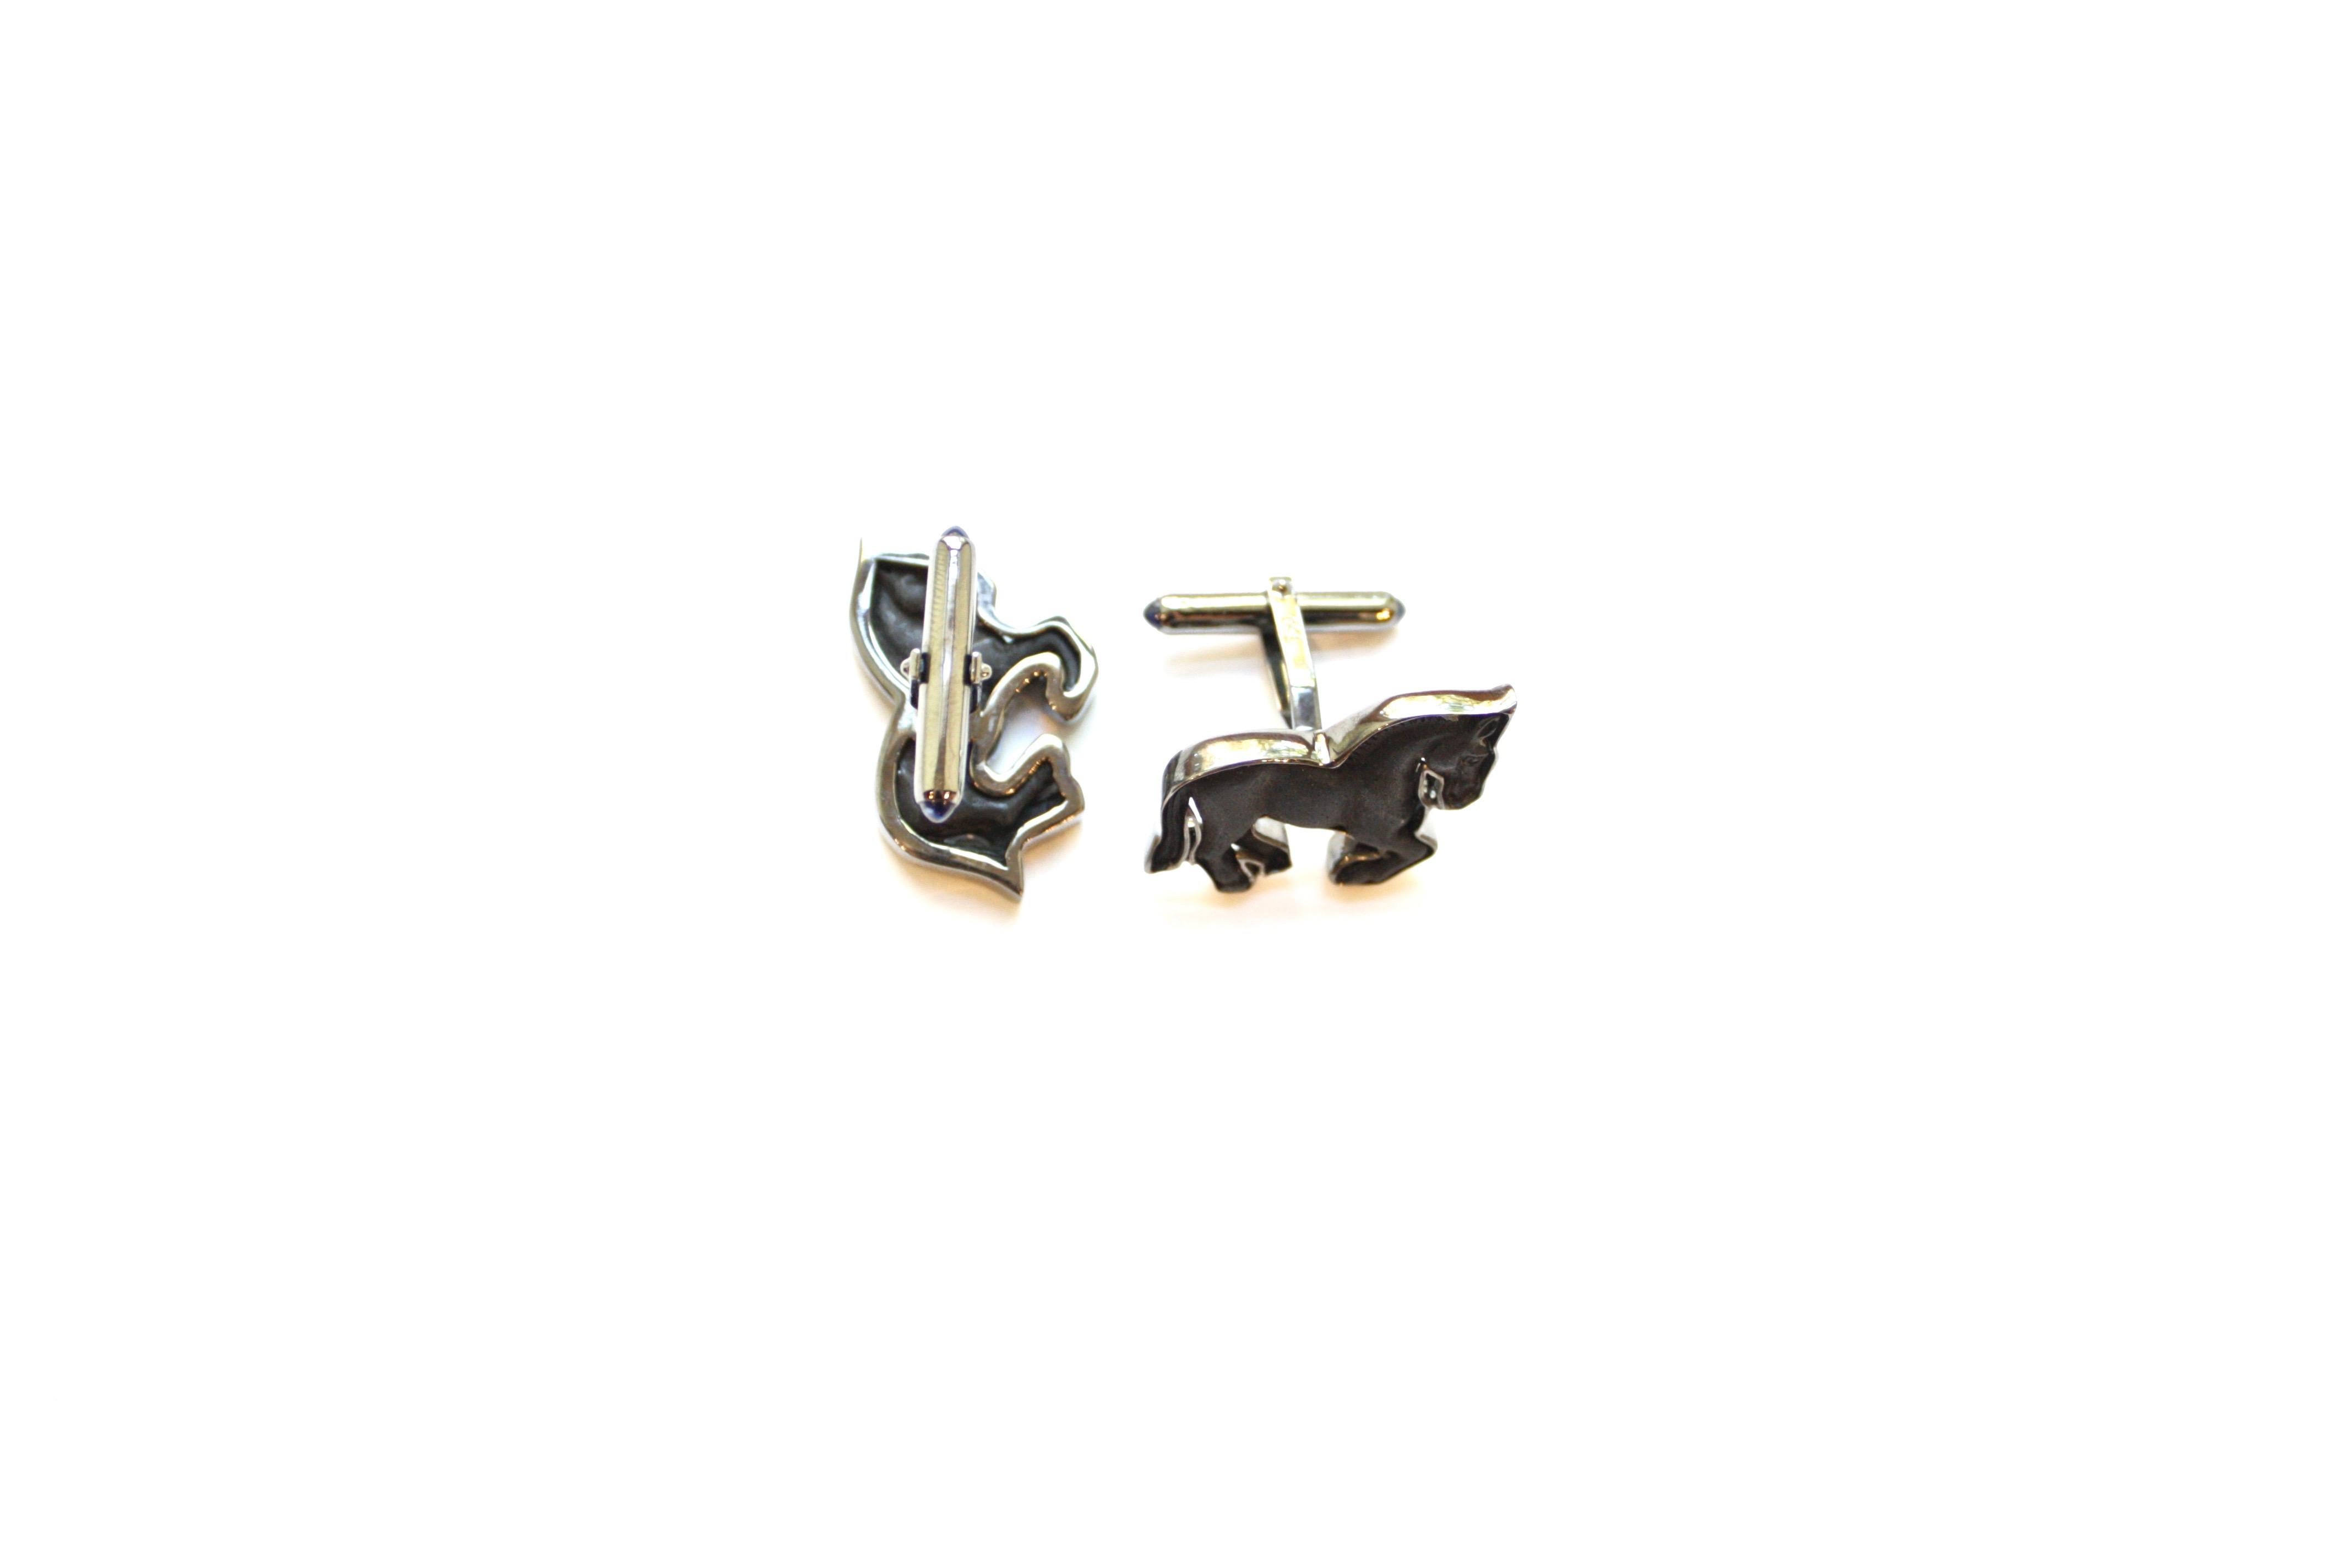 Horse Cufflinks
A pair of eighteen-karat white gold cufflinks, each set with a hand-carved ebony horse, mid gallop.  Additionally, the cufflink backs are each tipped with a blue sapphire cabochon.
Blue Sapphire Total Weight – 0.35cts.
Wood Total